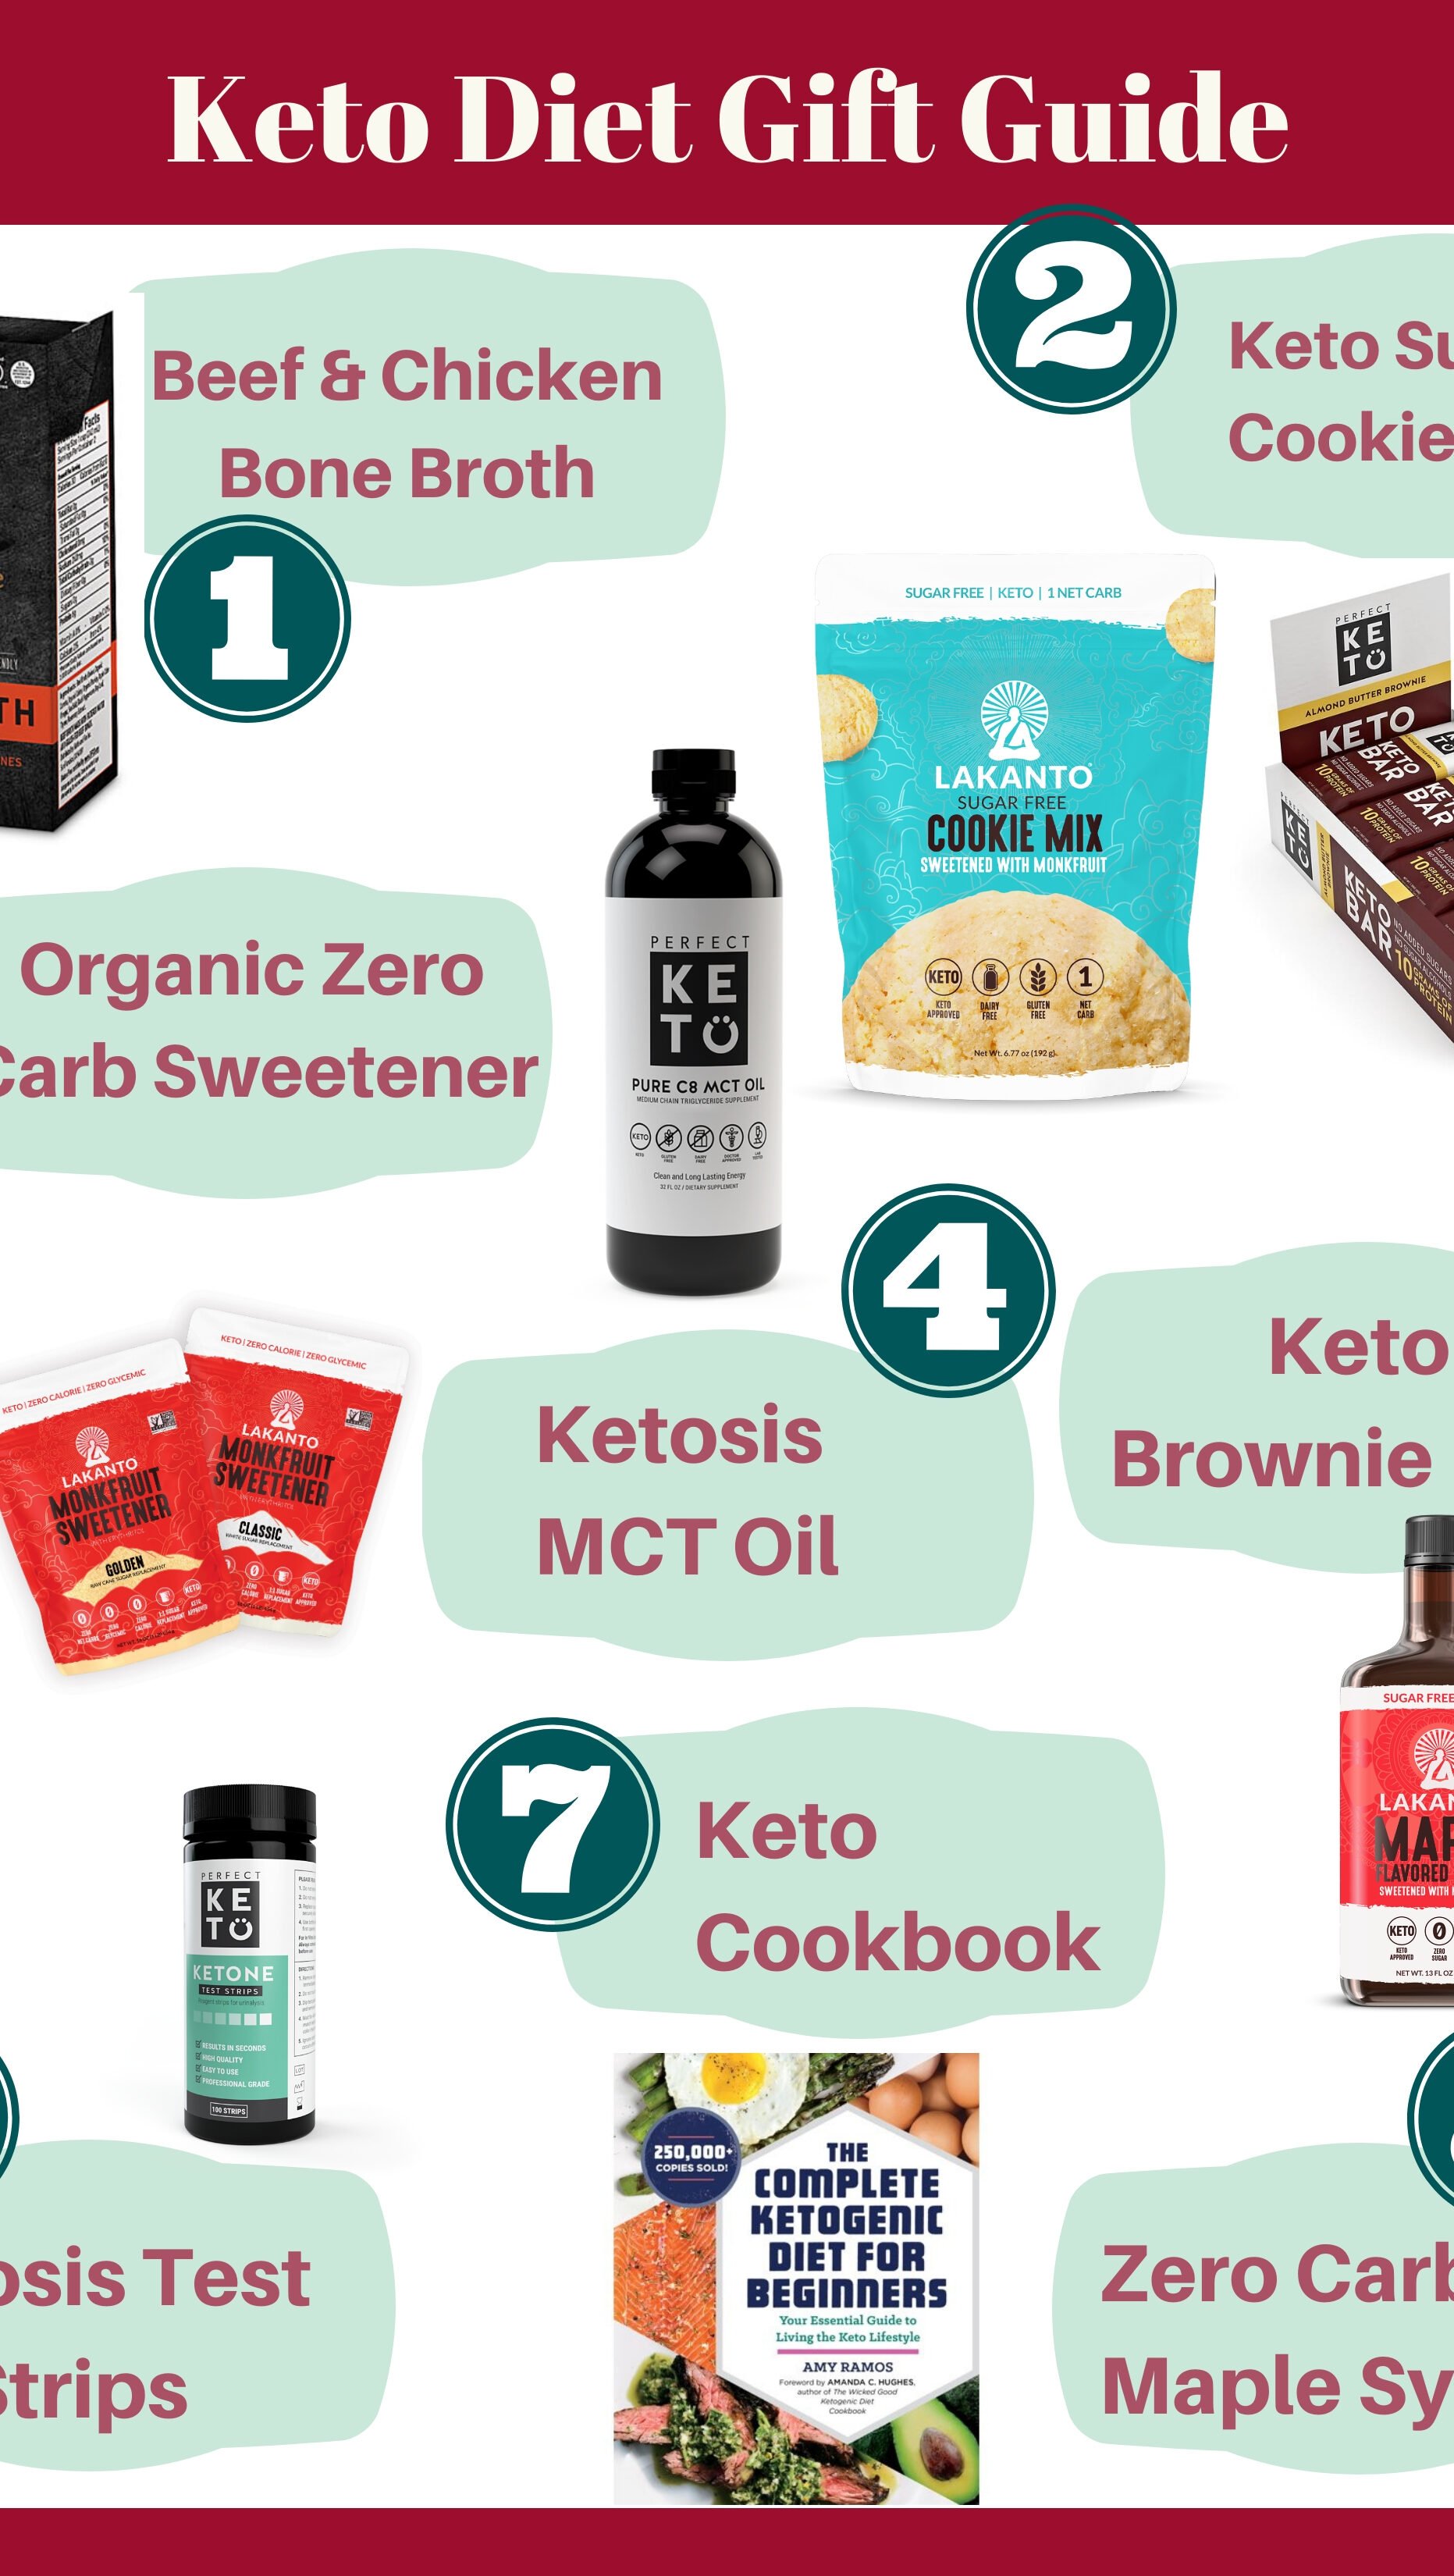 The Best Keto Gift Ideas and Guide